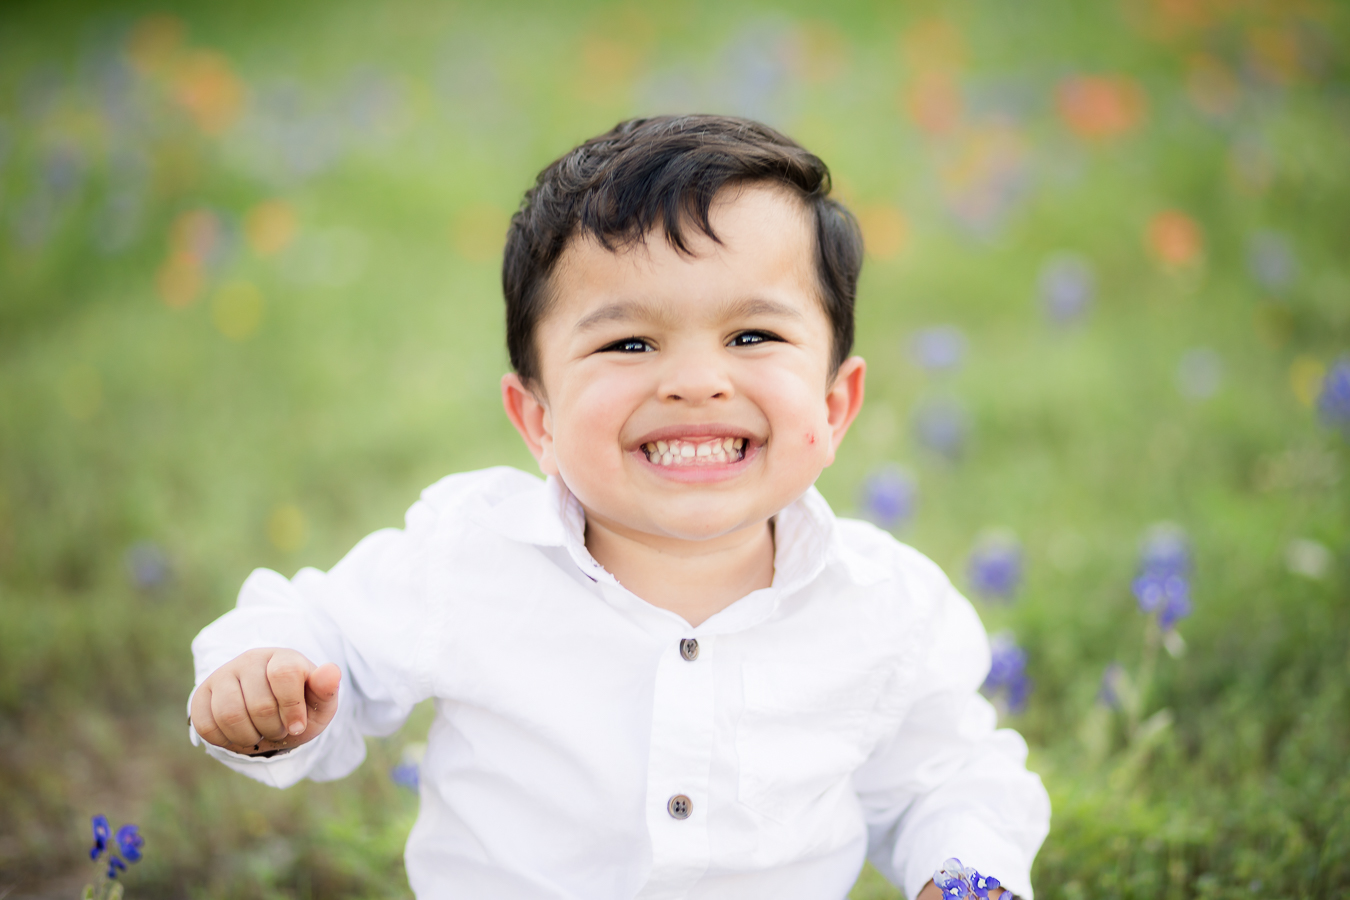 Houston Brenham Bluebonnet Photos | How to take Photos of your Kids in the Bluebonnets